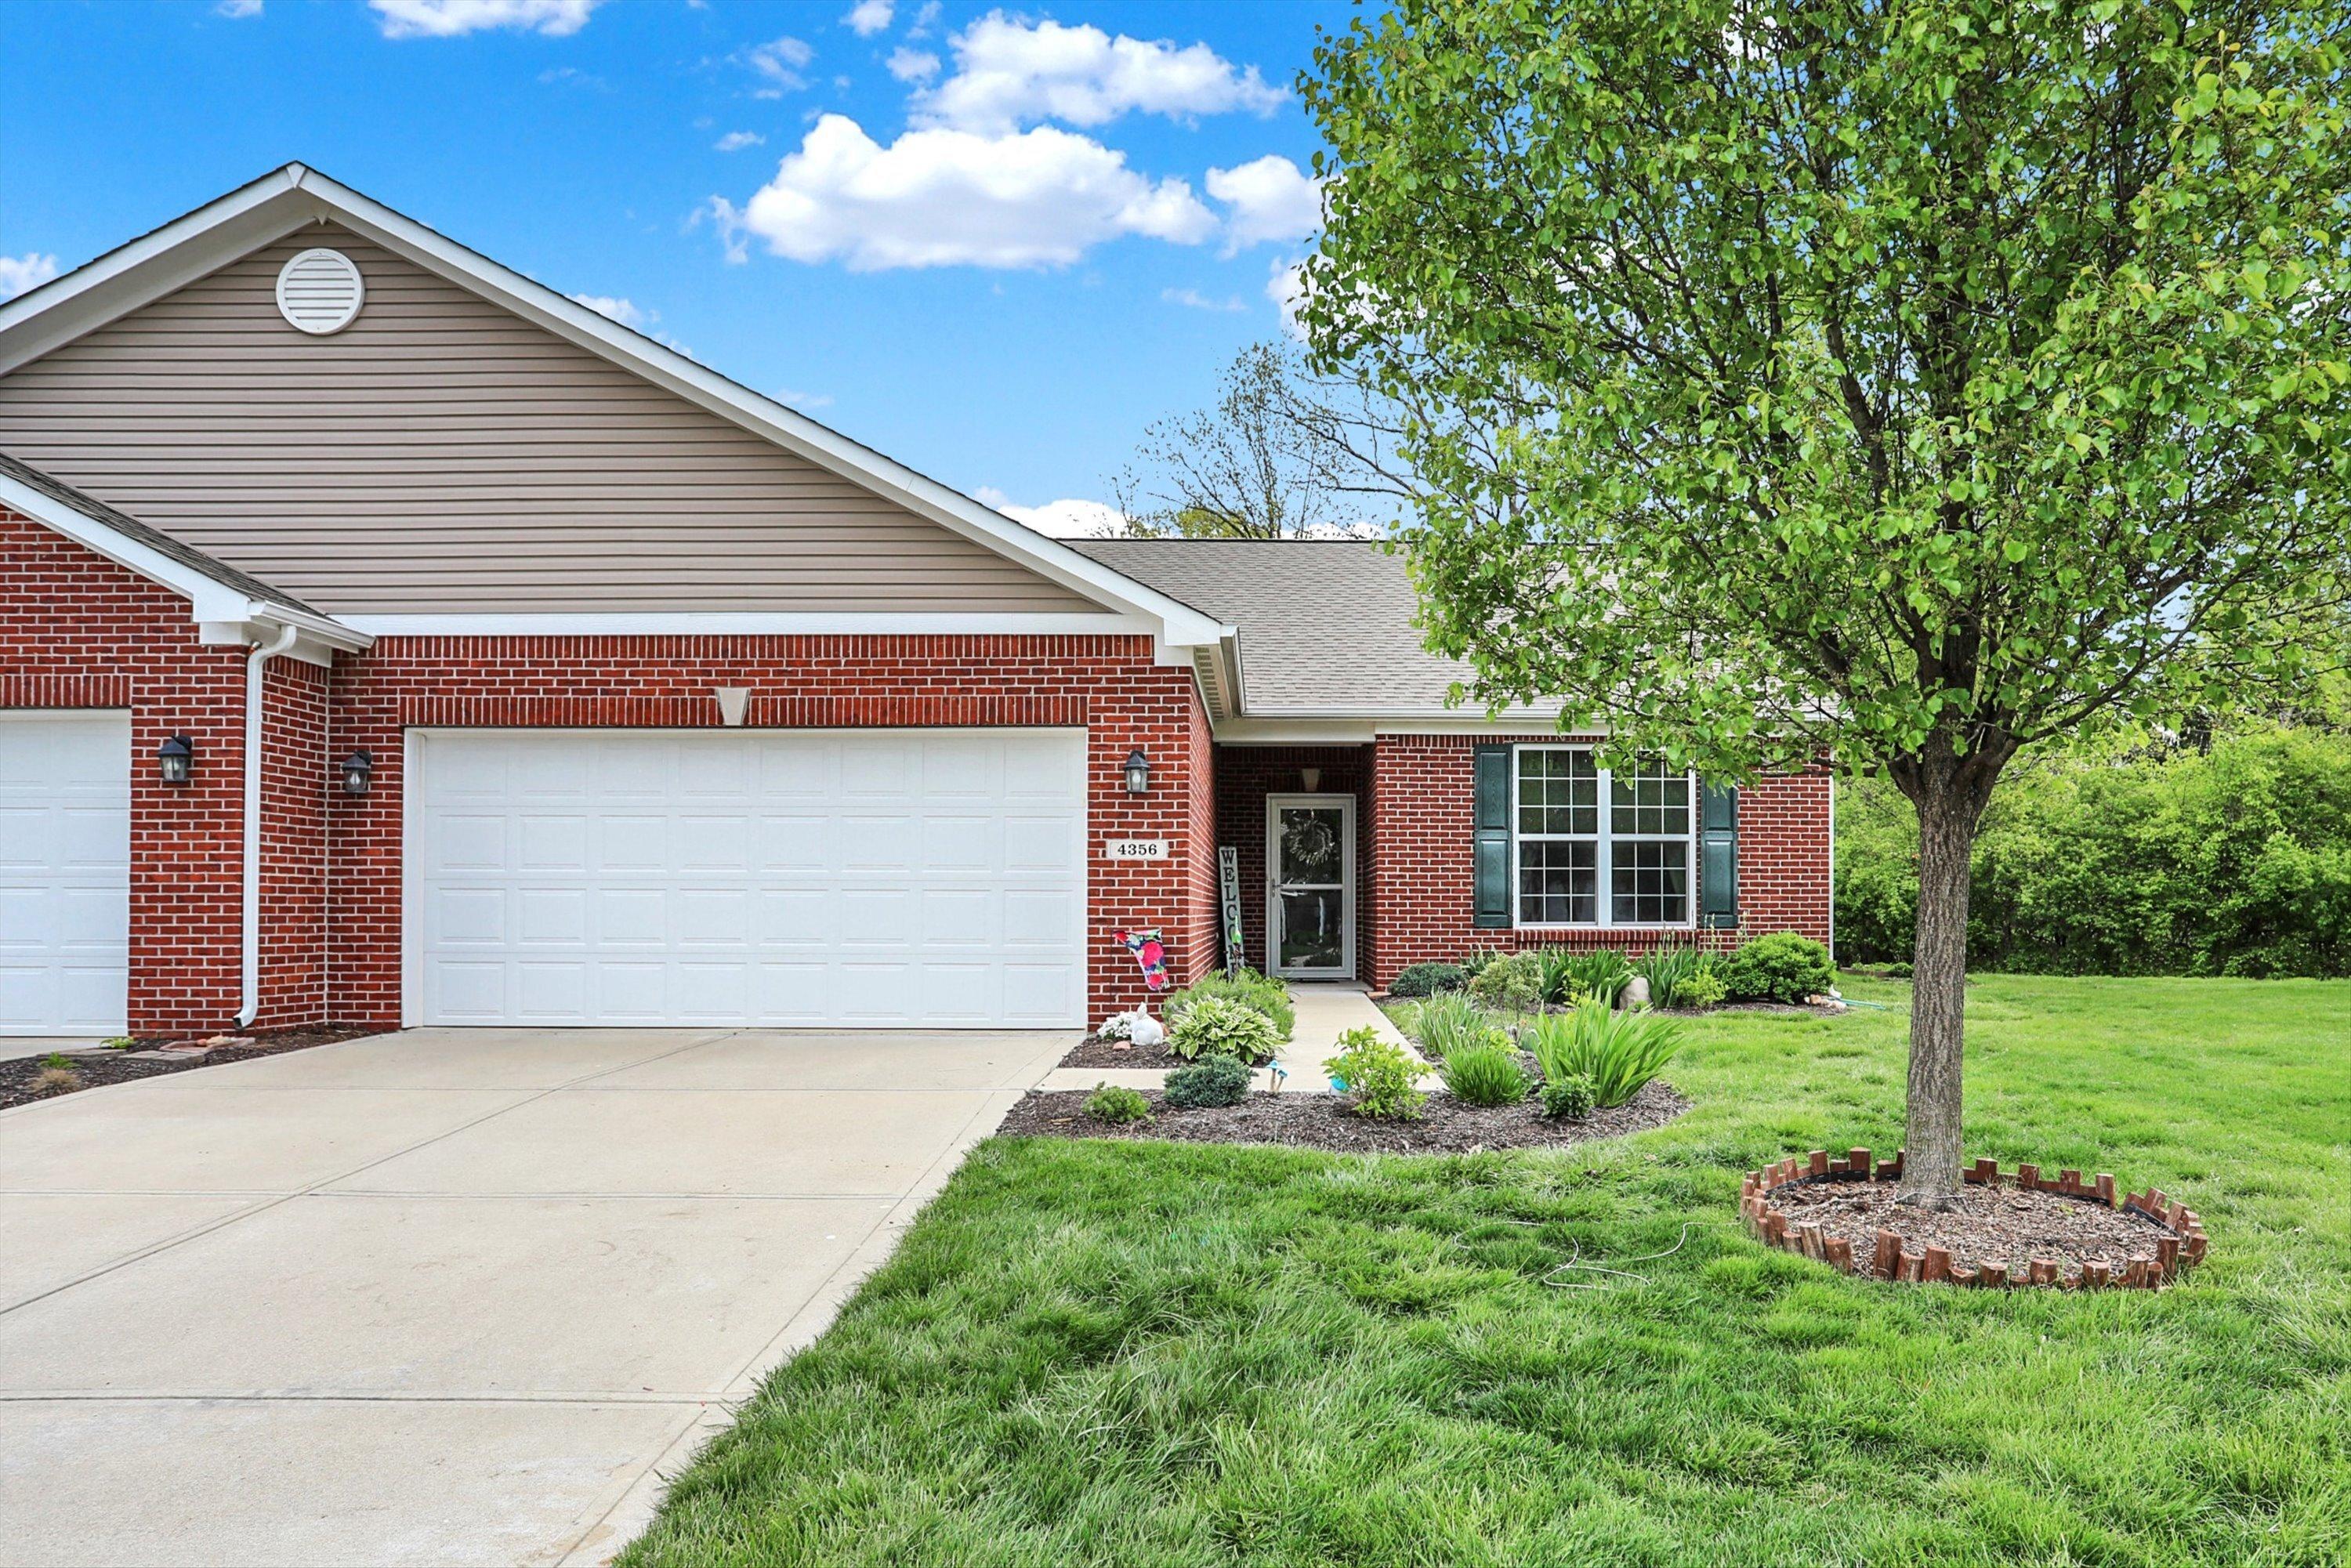 Photo one of 4356 Yarrow Ct Indianapolis IN 46237 | MLS 21974117